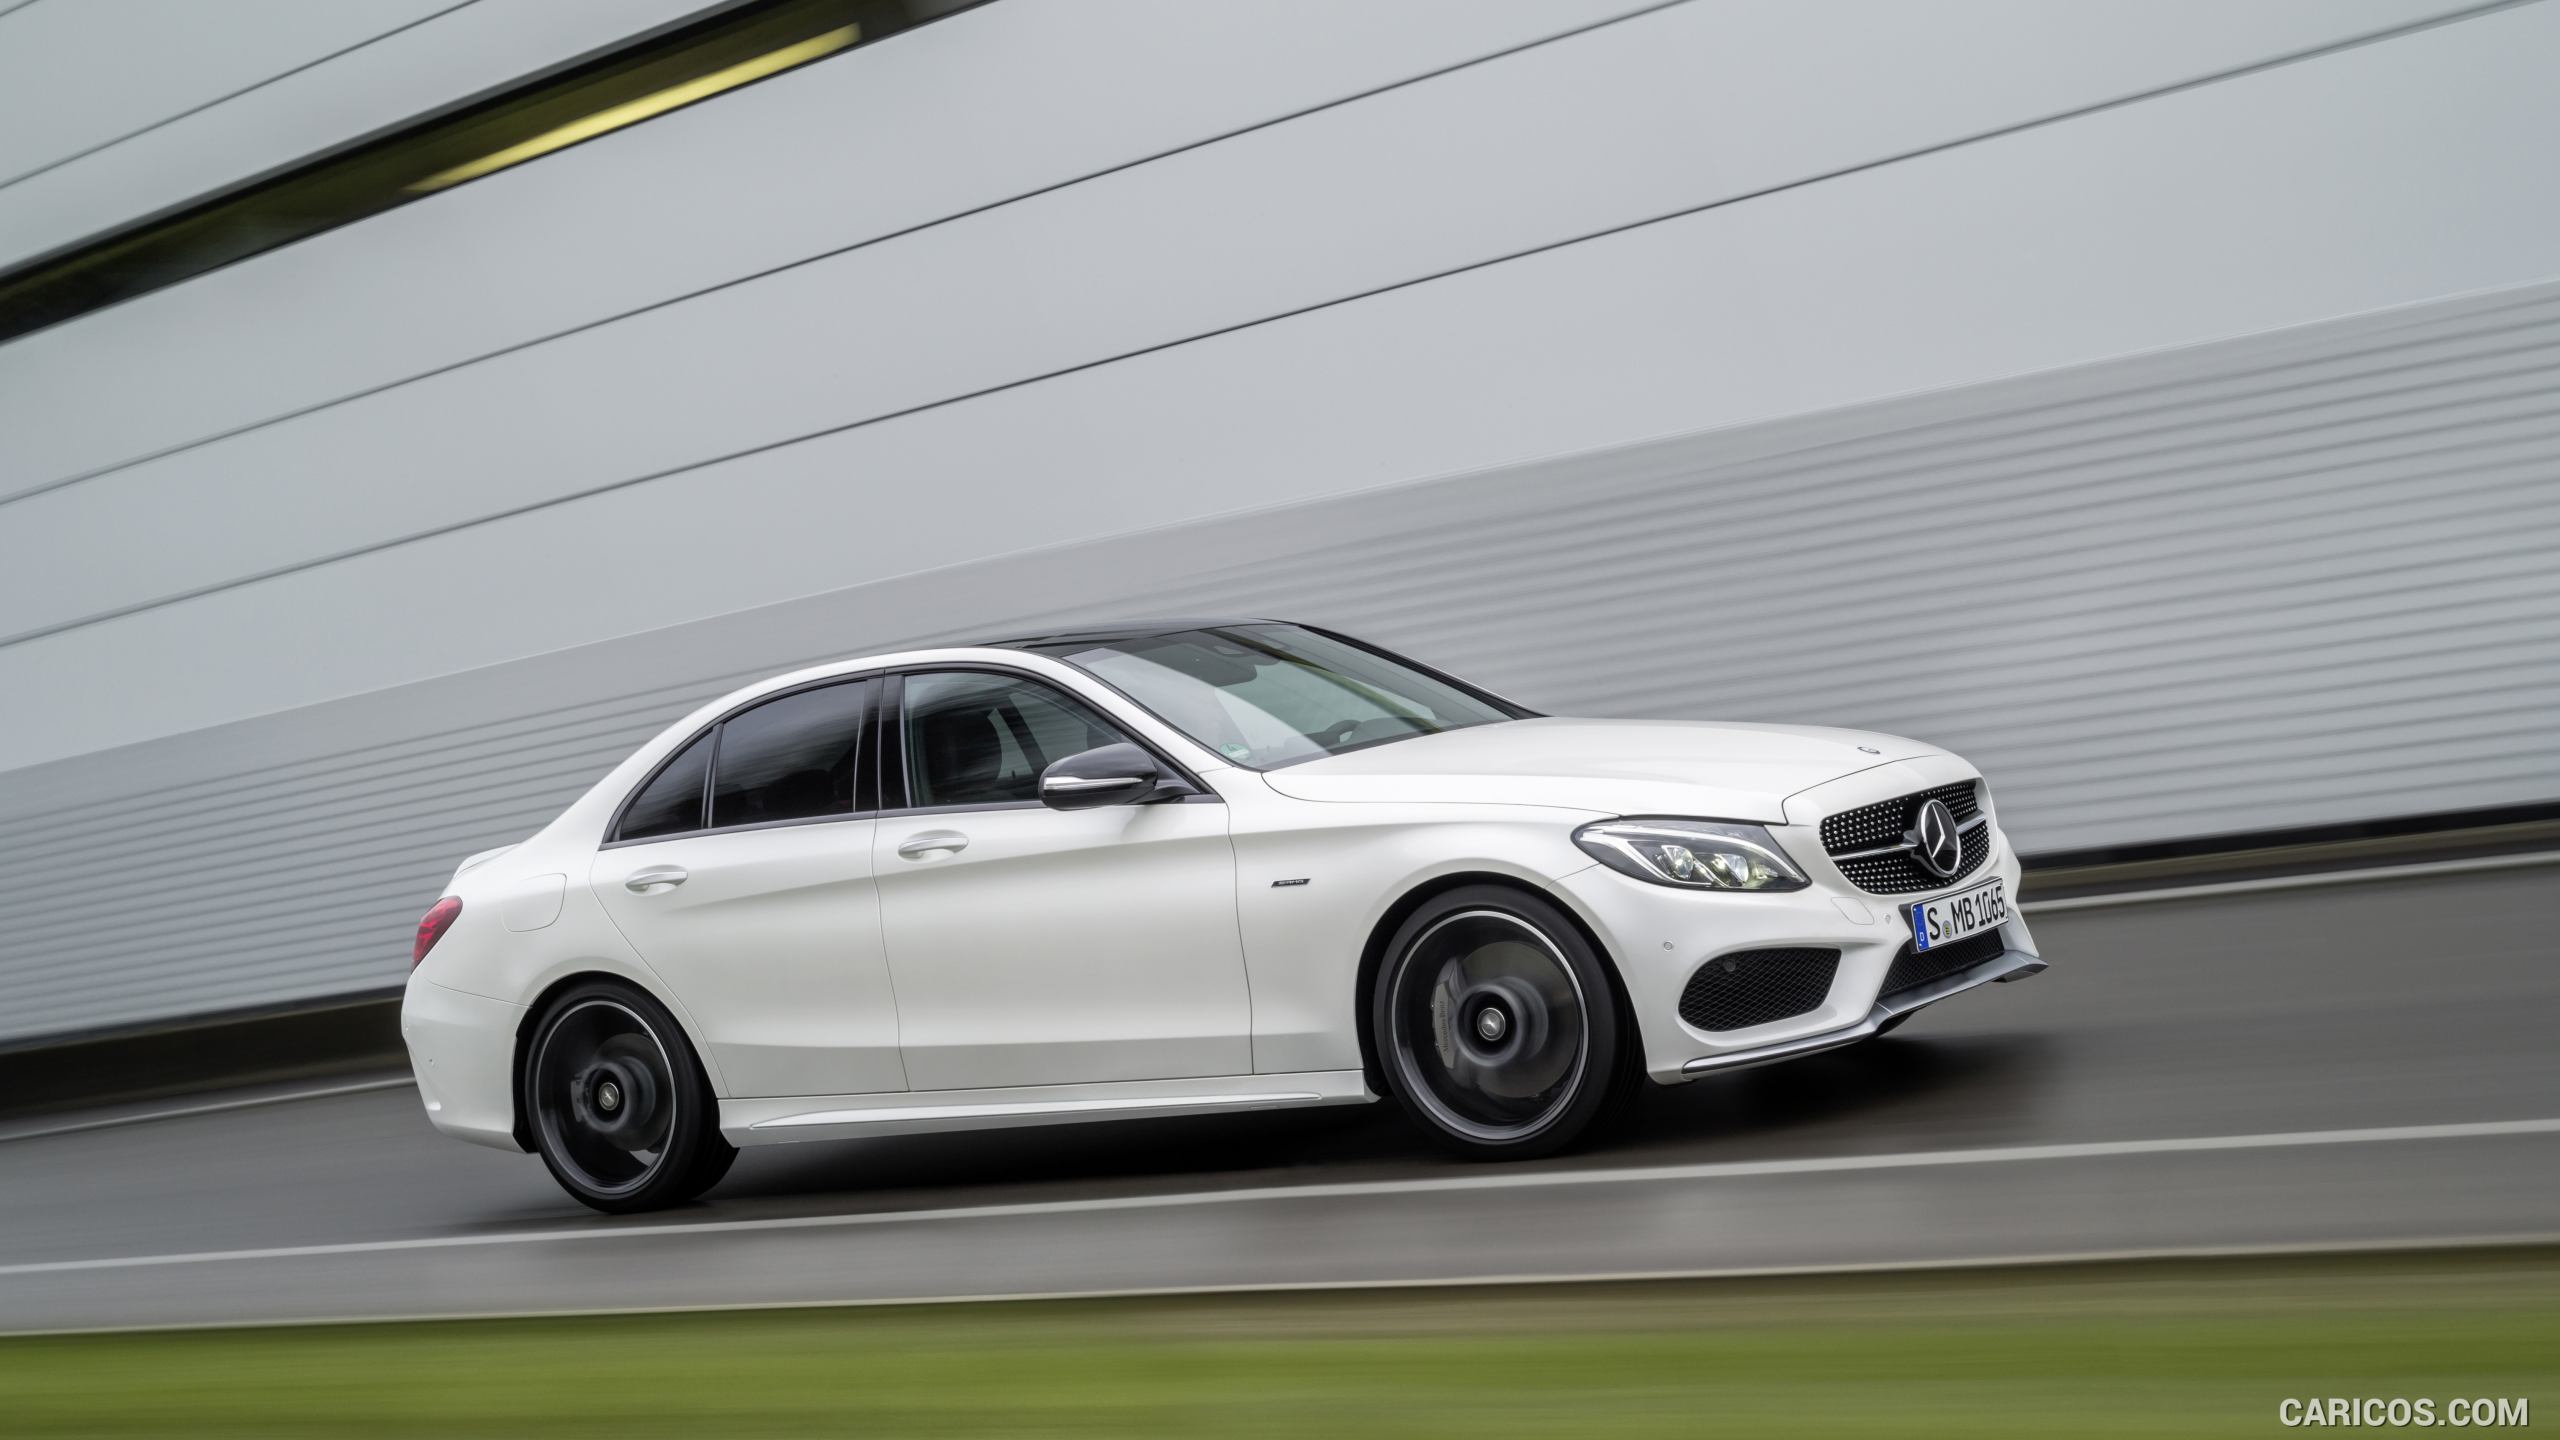 2016 Mercedes-Benz C450 AMG 4MATIC (Diamond White) - Side, #12 of 122